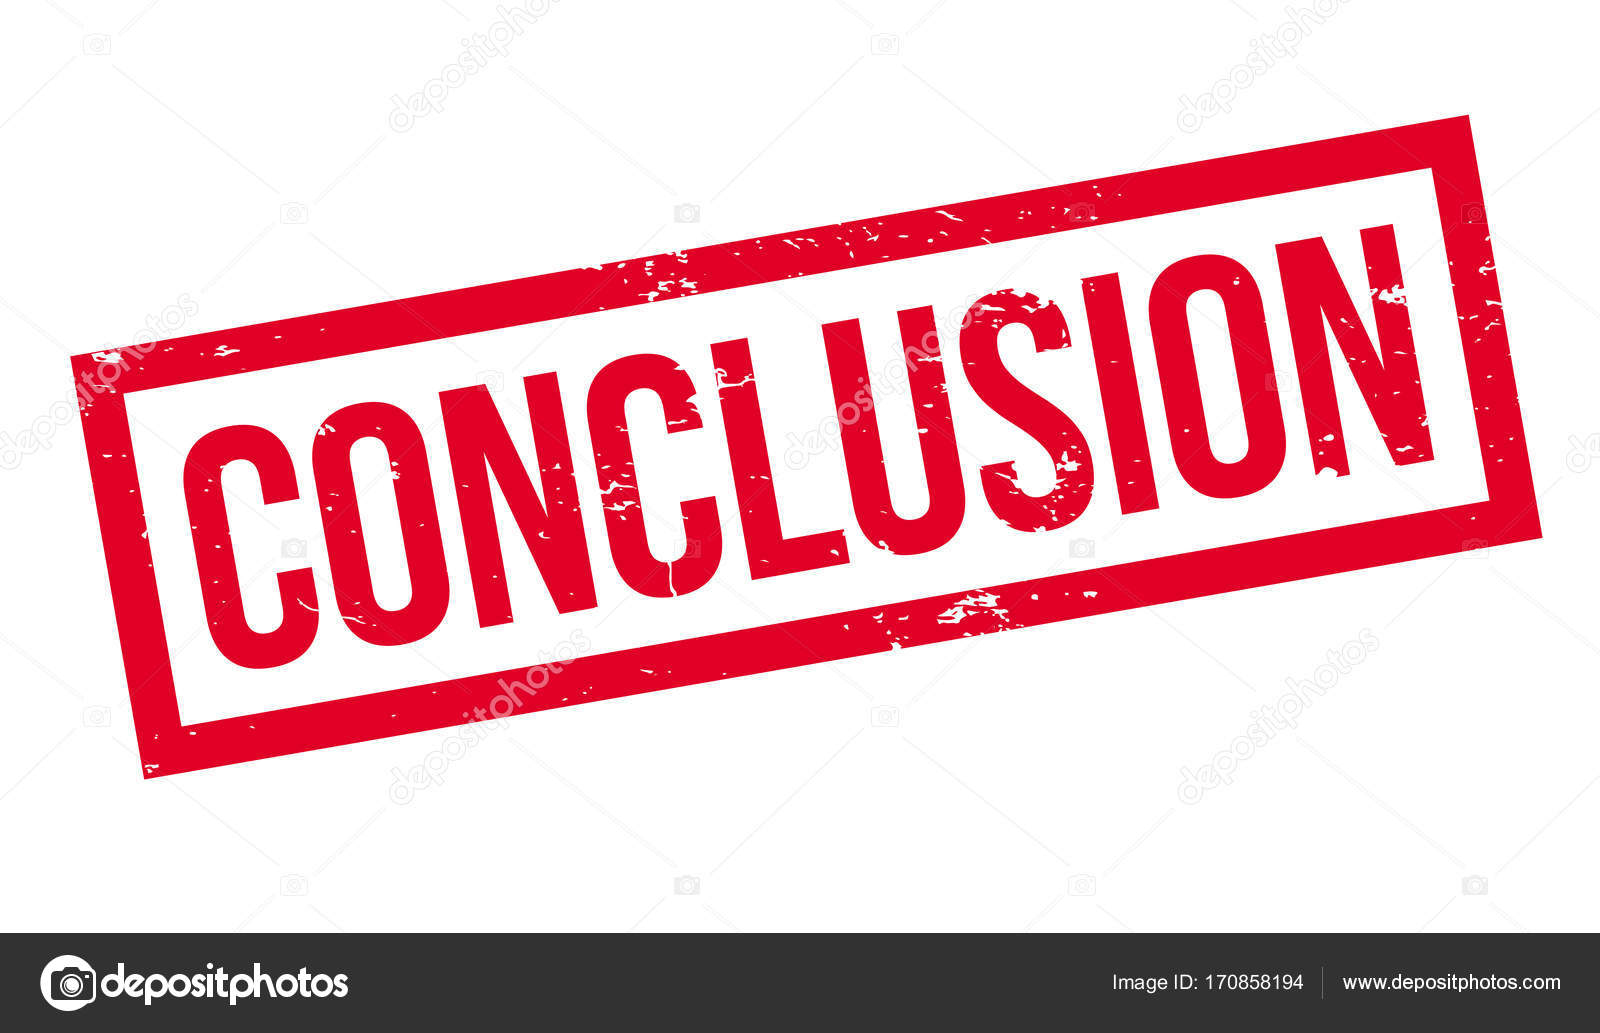 Conclusion Rubber Stamp Vector Image By C Lkeskinen0 Vector Stock